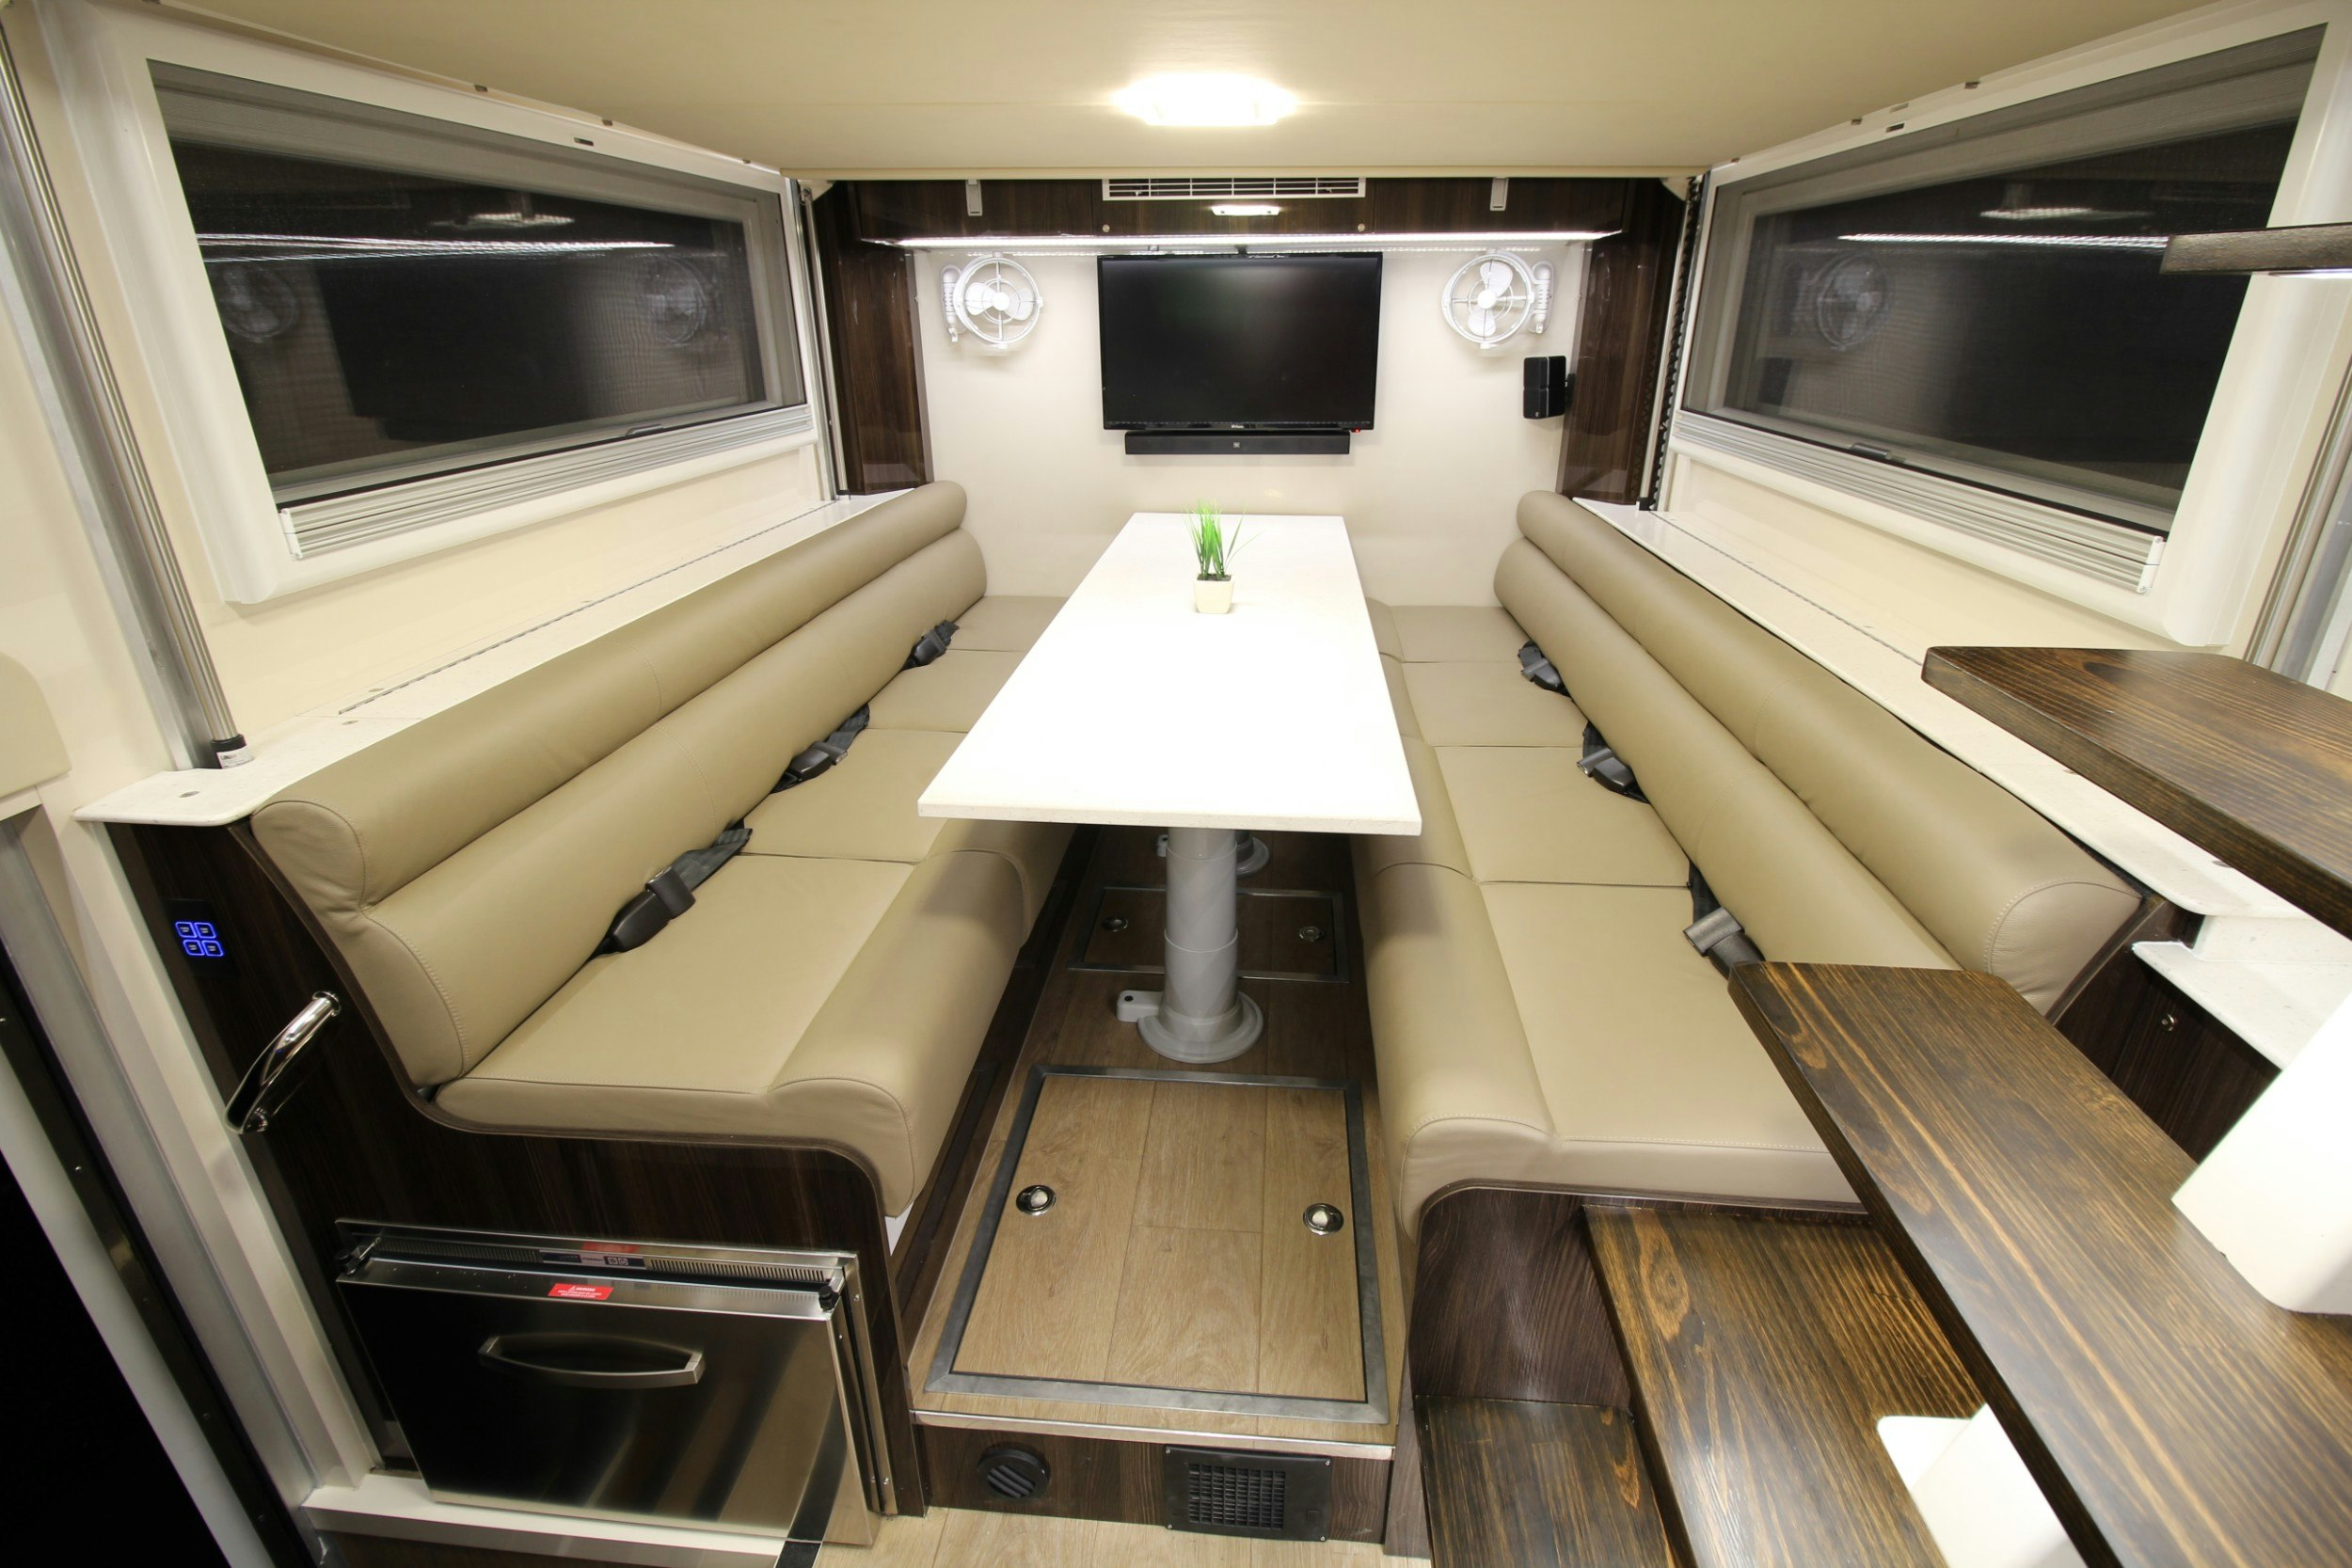 The lounge area of the SLRV Commander 8x8 expedition vehicle